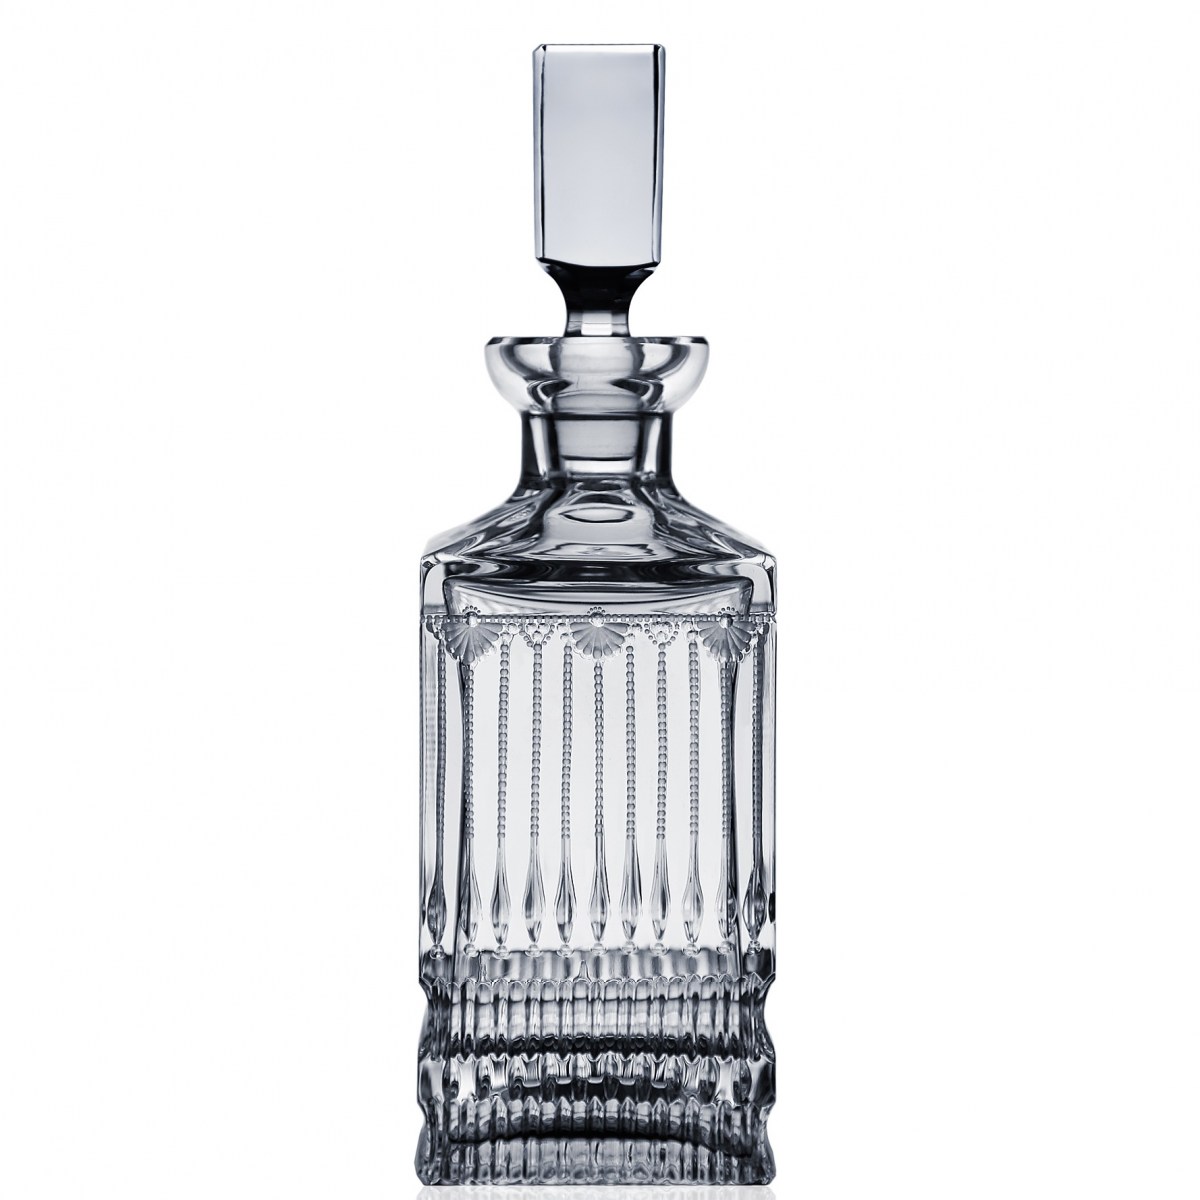 Venice Clear Whiskey Decanter - $ 0 / € 1180